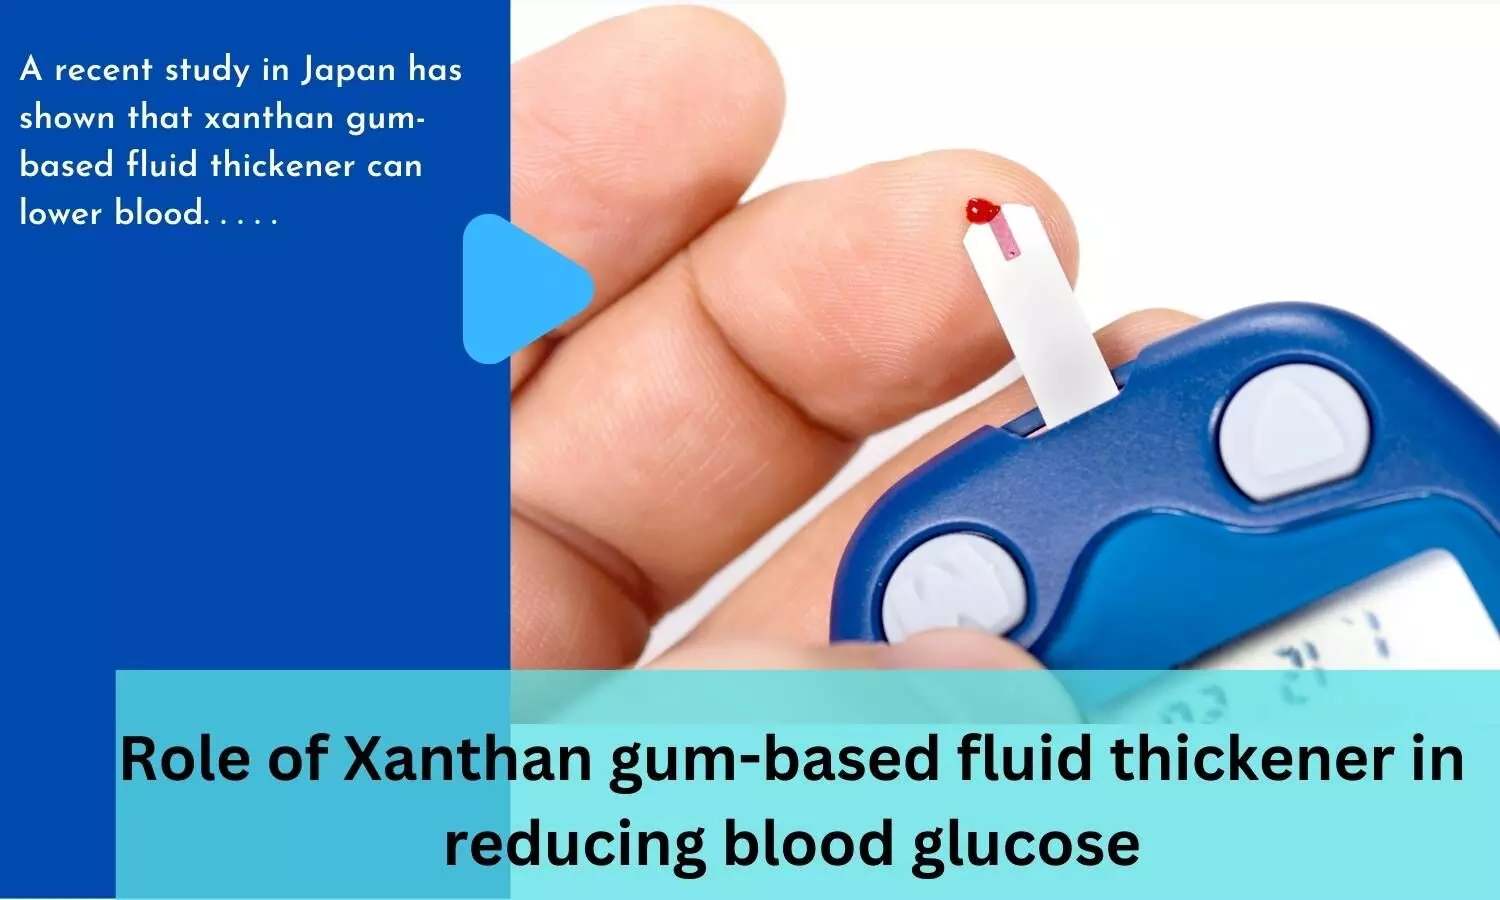 Role of Xanthan gum-based fluid thickener in reducing blood glucose